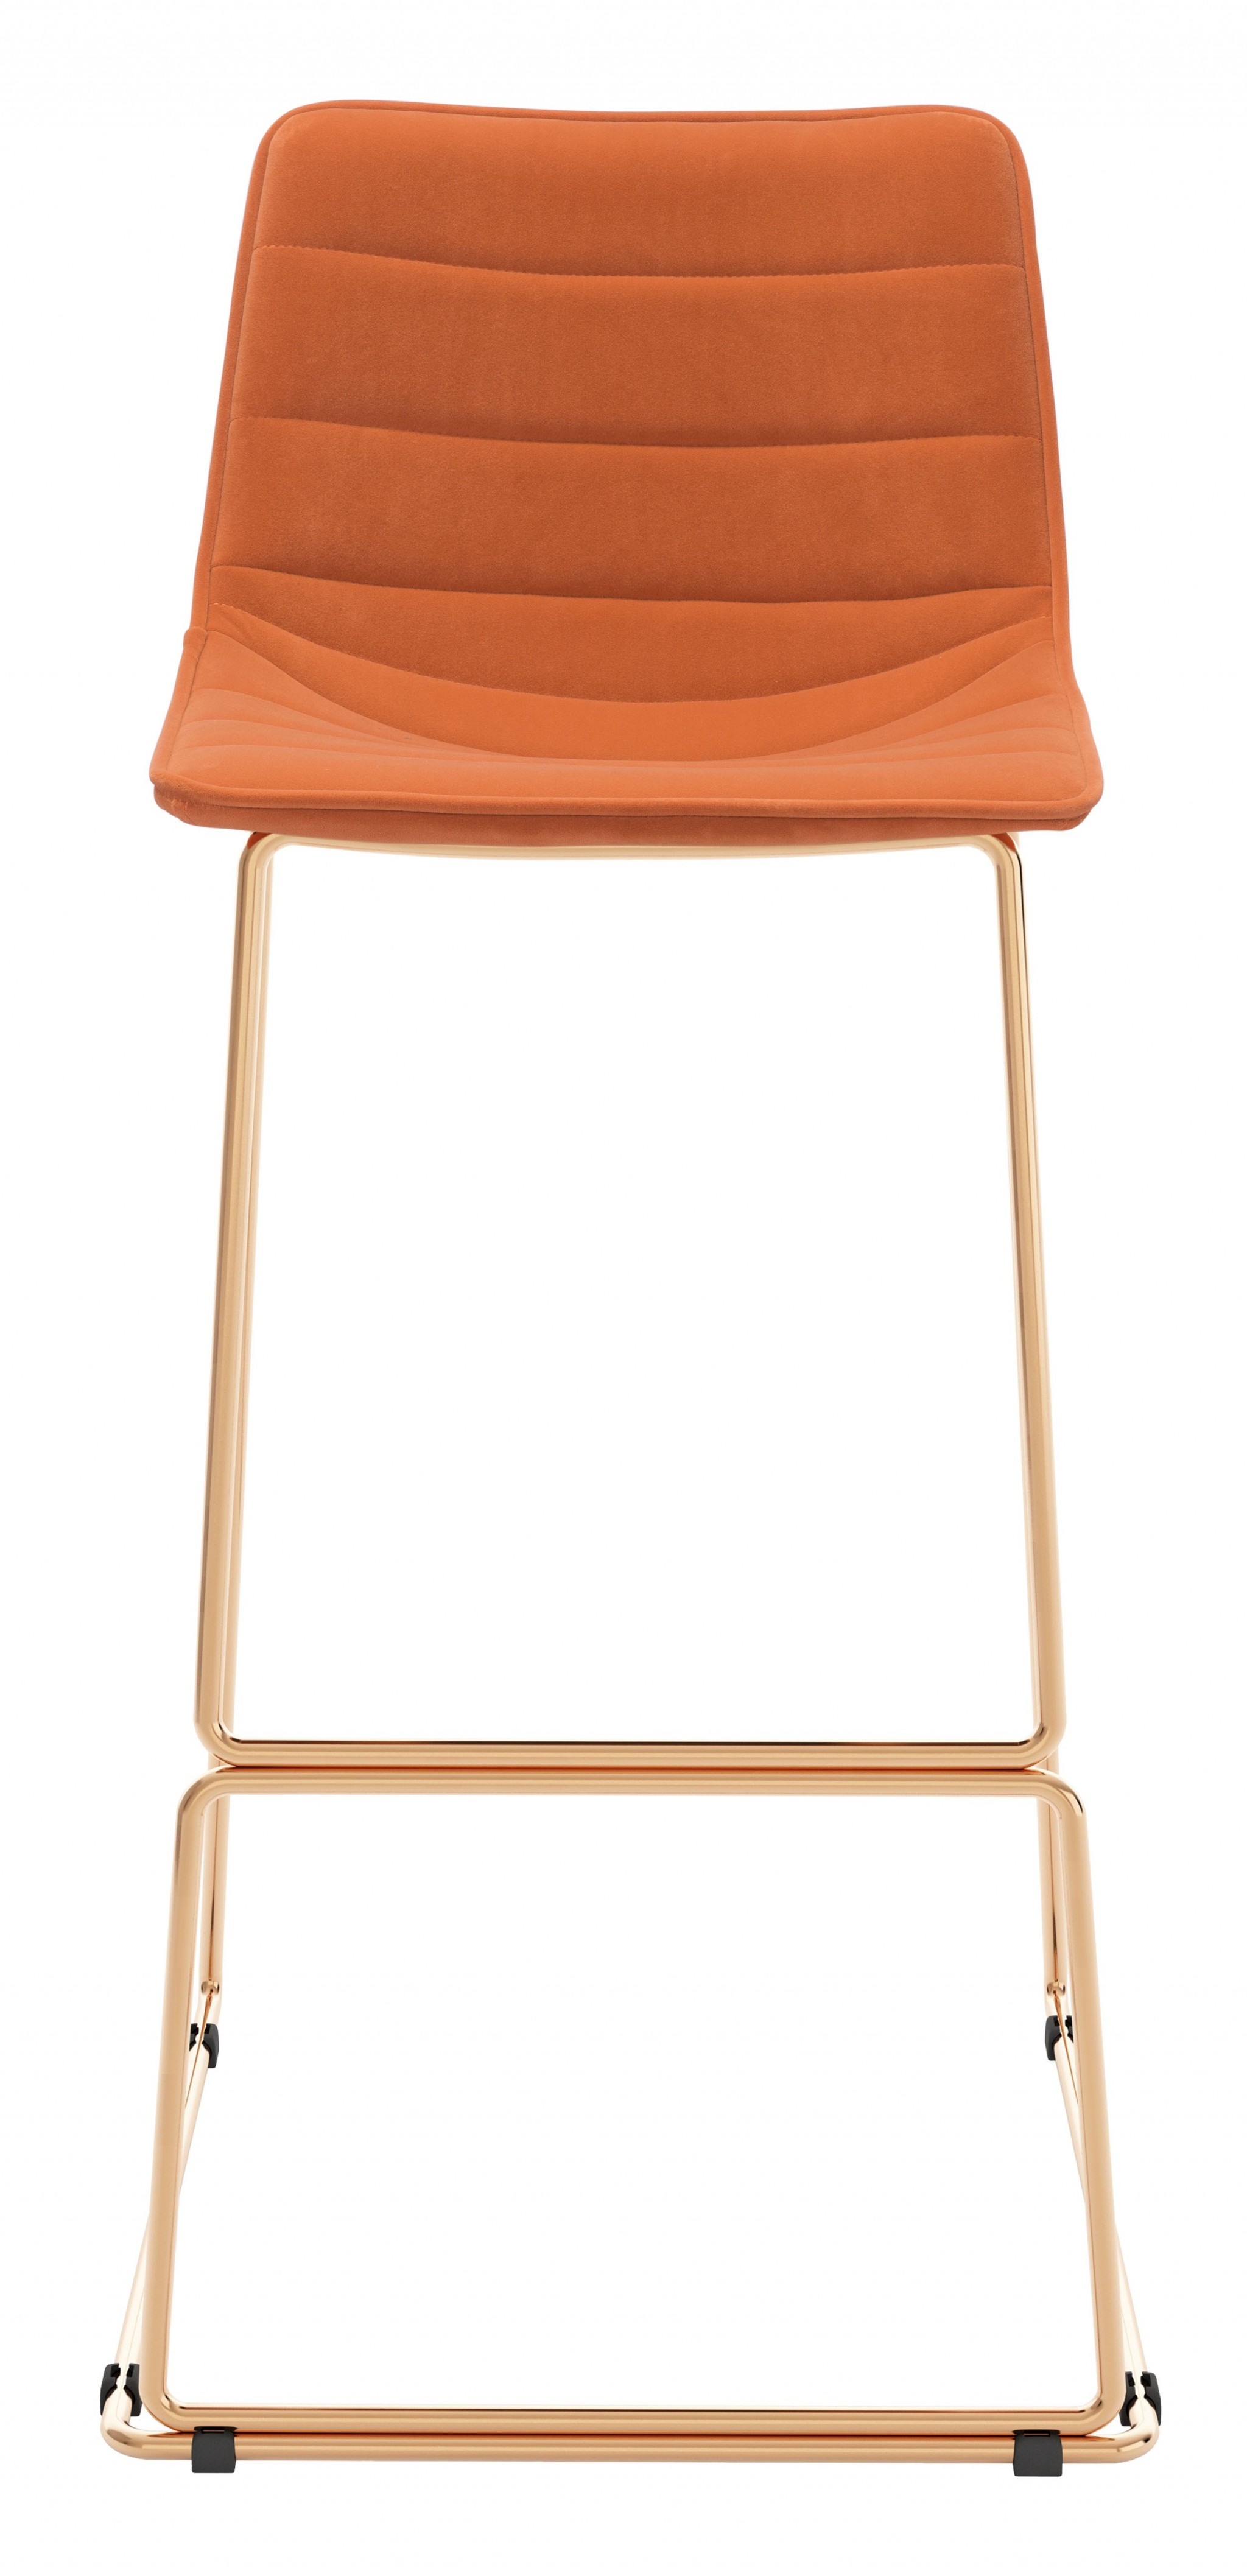 Mod Orange and Gold Bar Height Chair